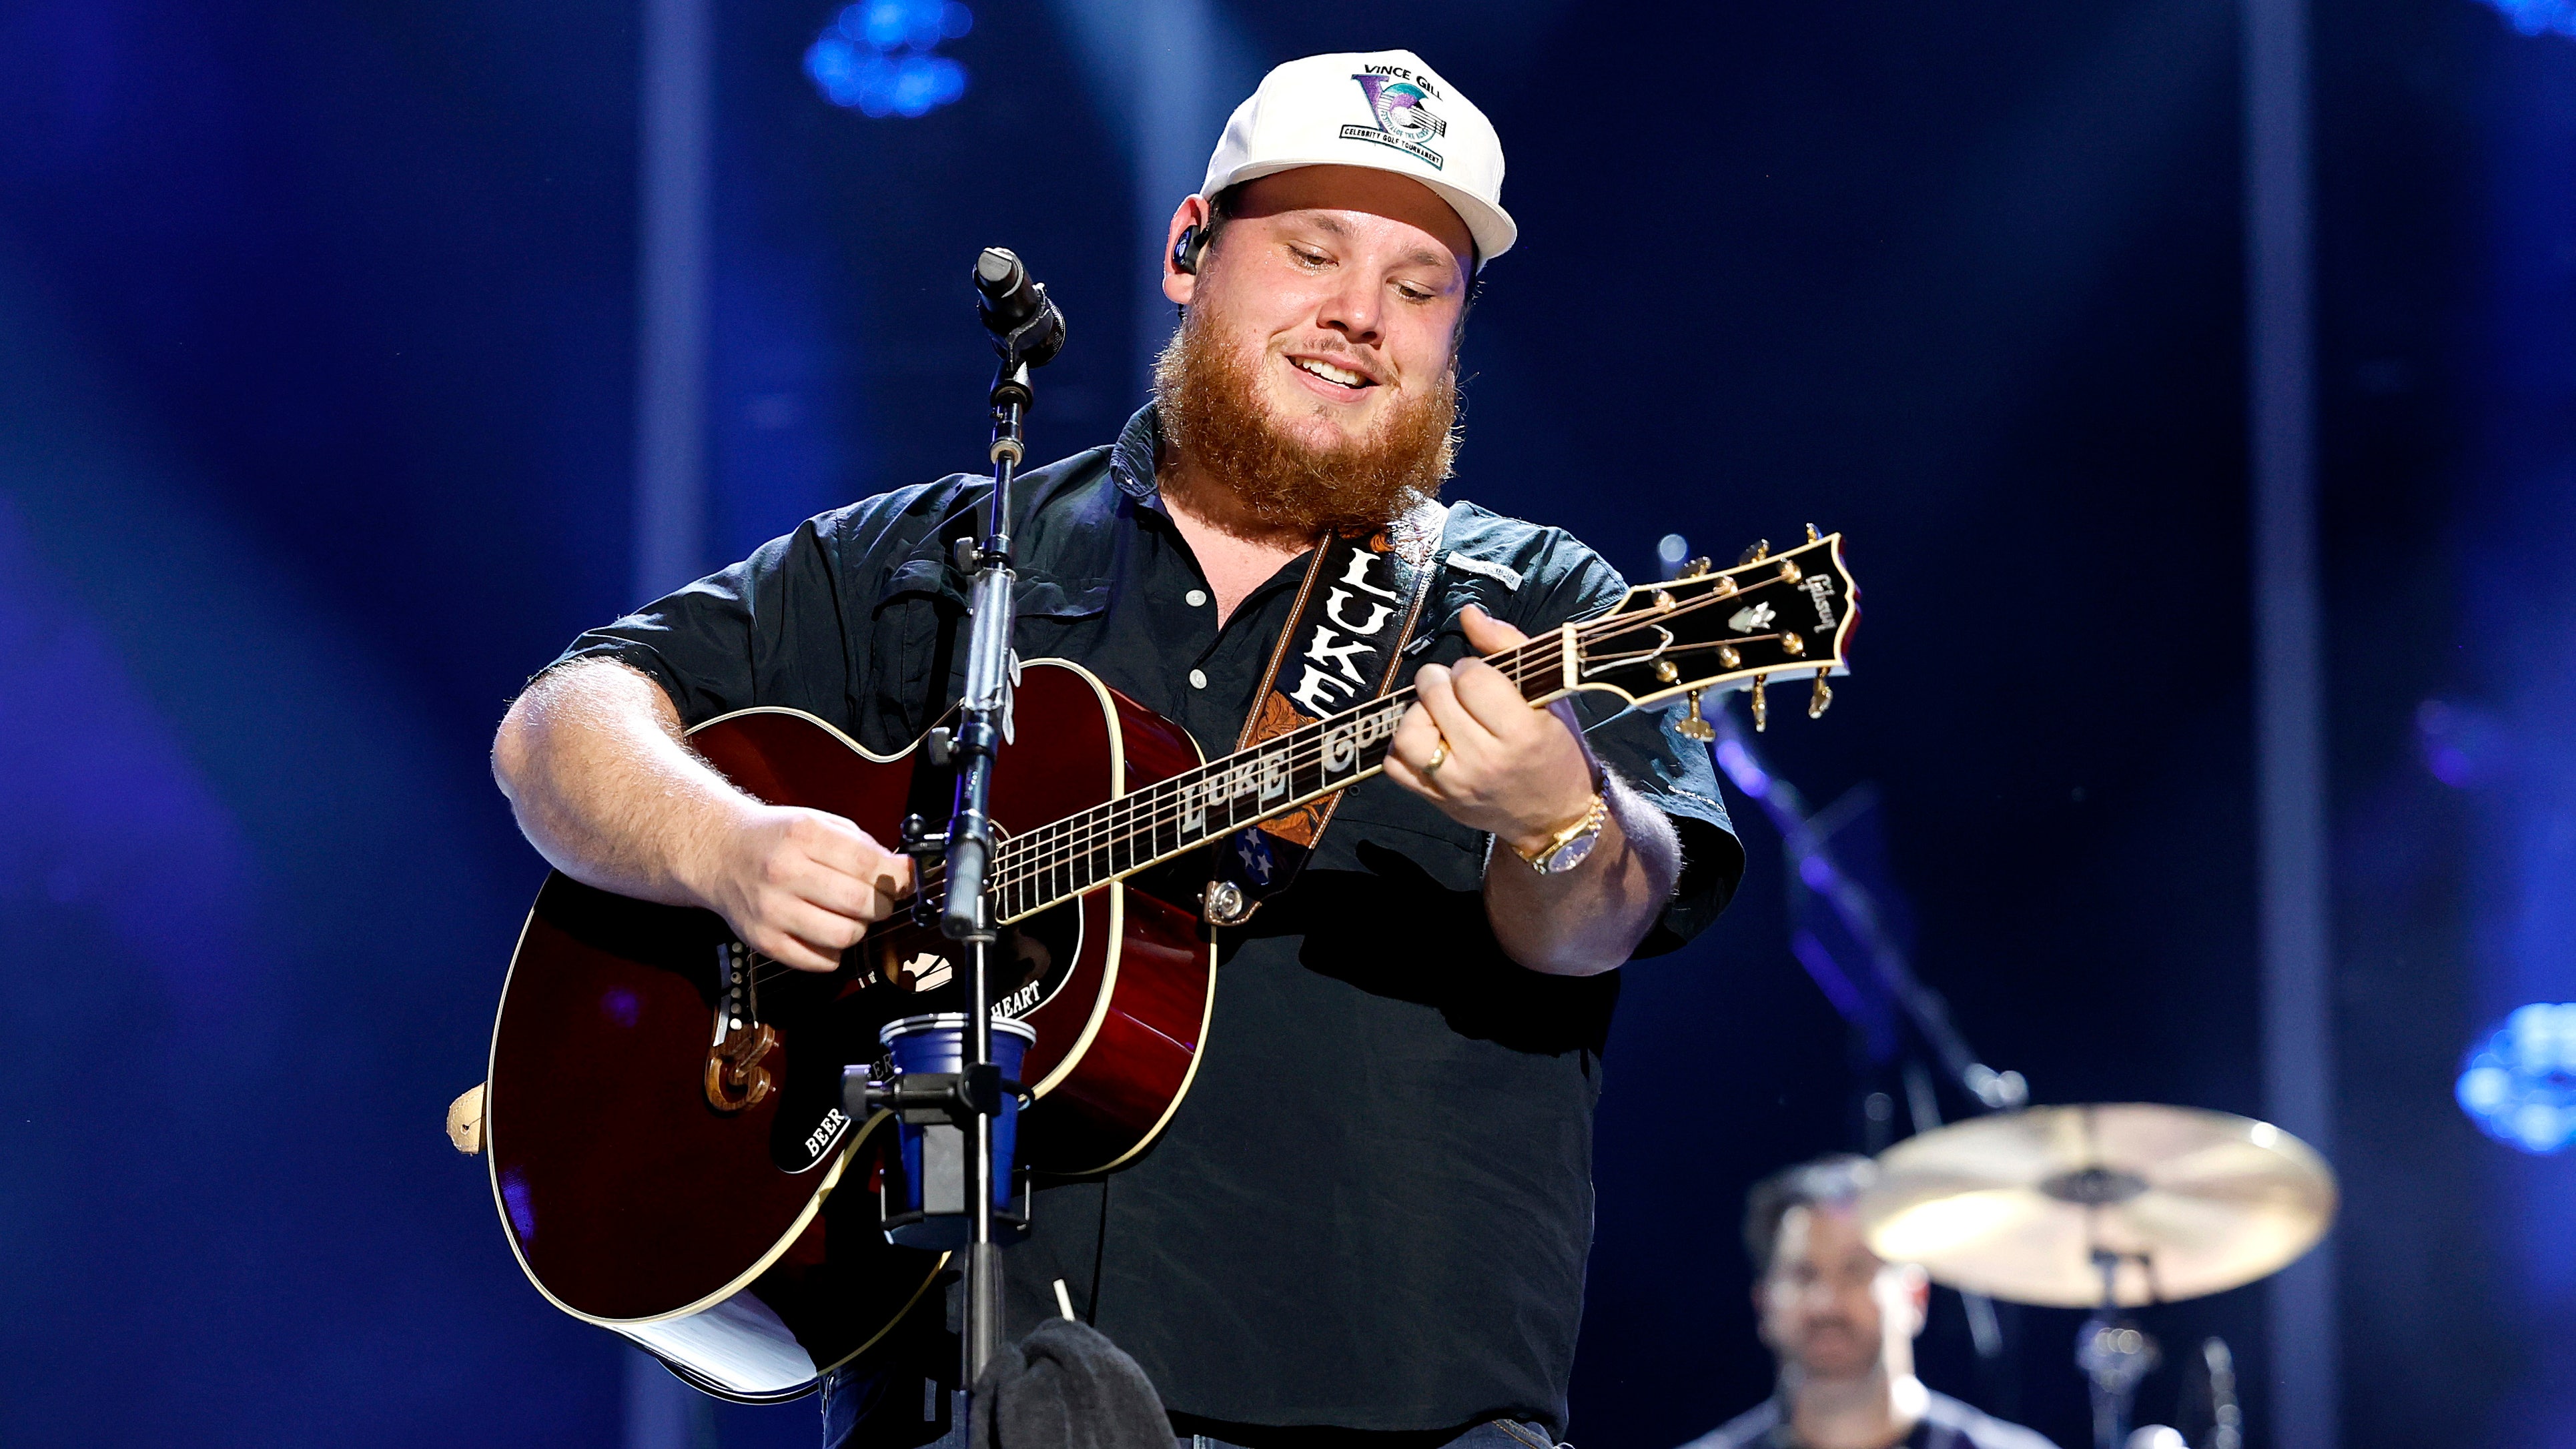 Luke Combs smiles as he looks down as his guitar while on stage